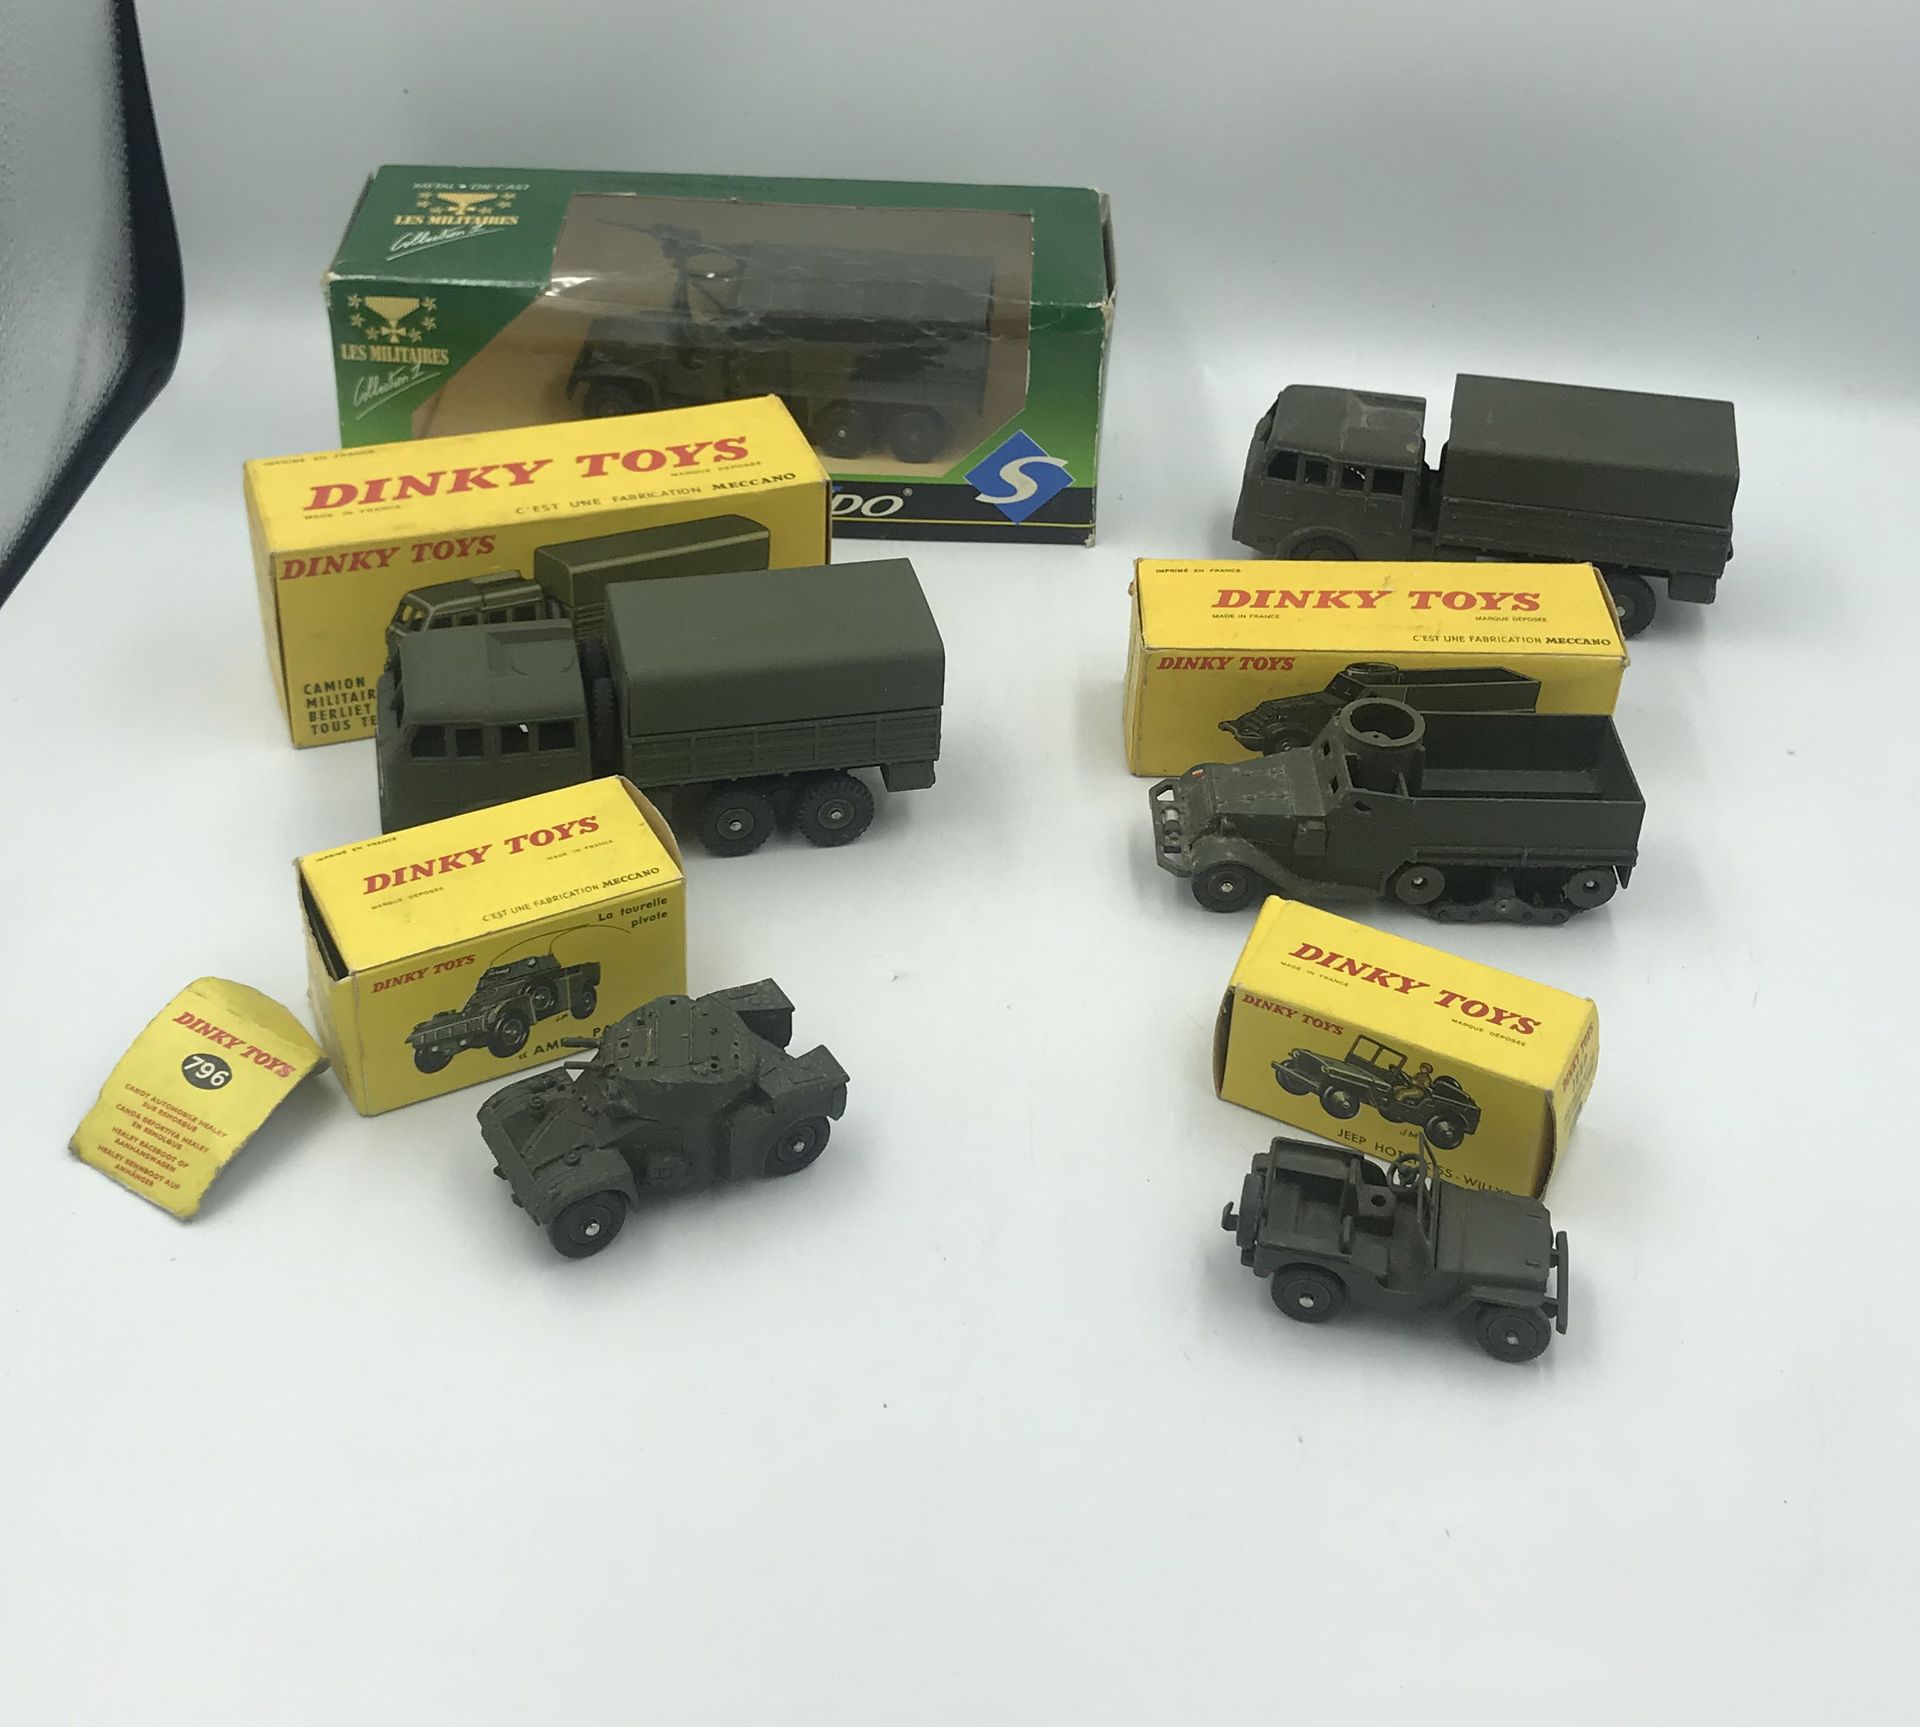 DINKY TOYS France DINKY TOYS Francia

Camion militare Berliet All Terrain 818 e &hellip;